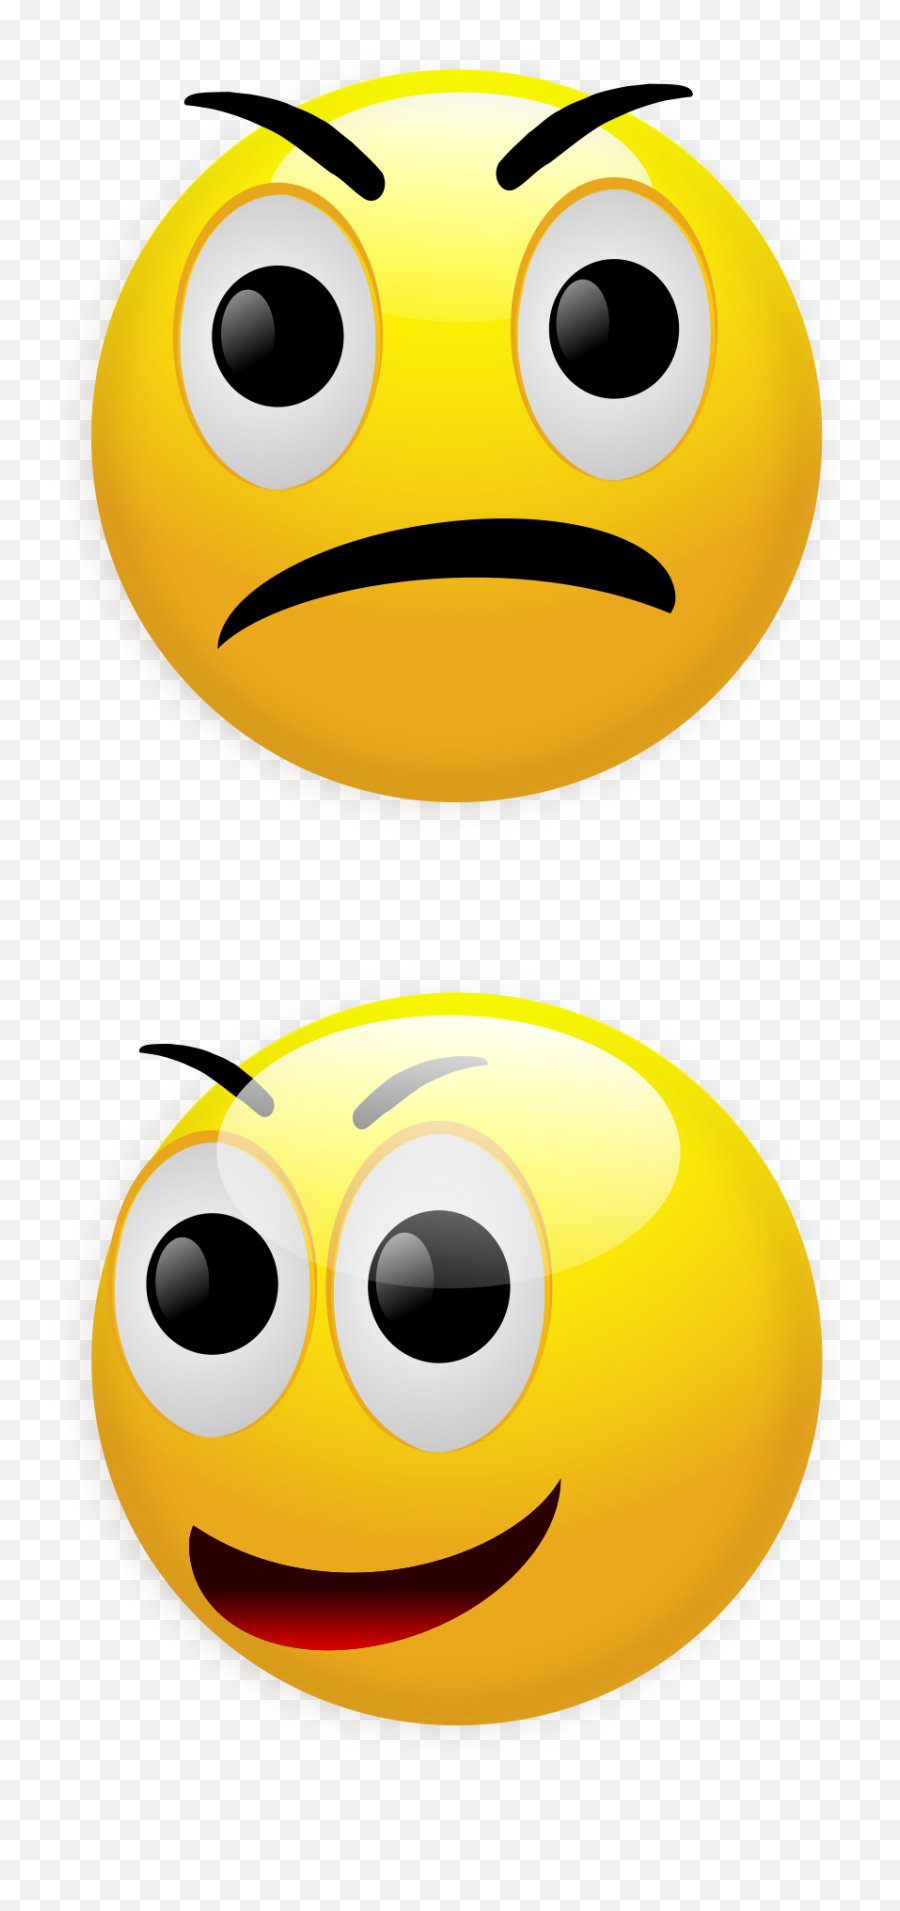 Smiley Angry Happy - Free Vector Graphic On Pixabay Transparent Background Transparent Emoji Gif,Adult Emoticon Gif.